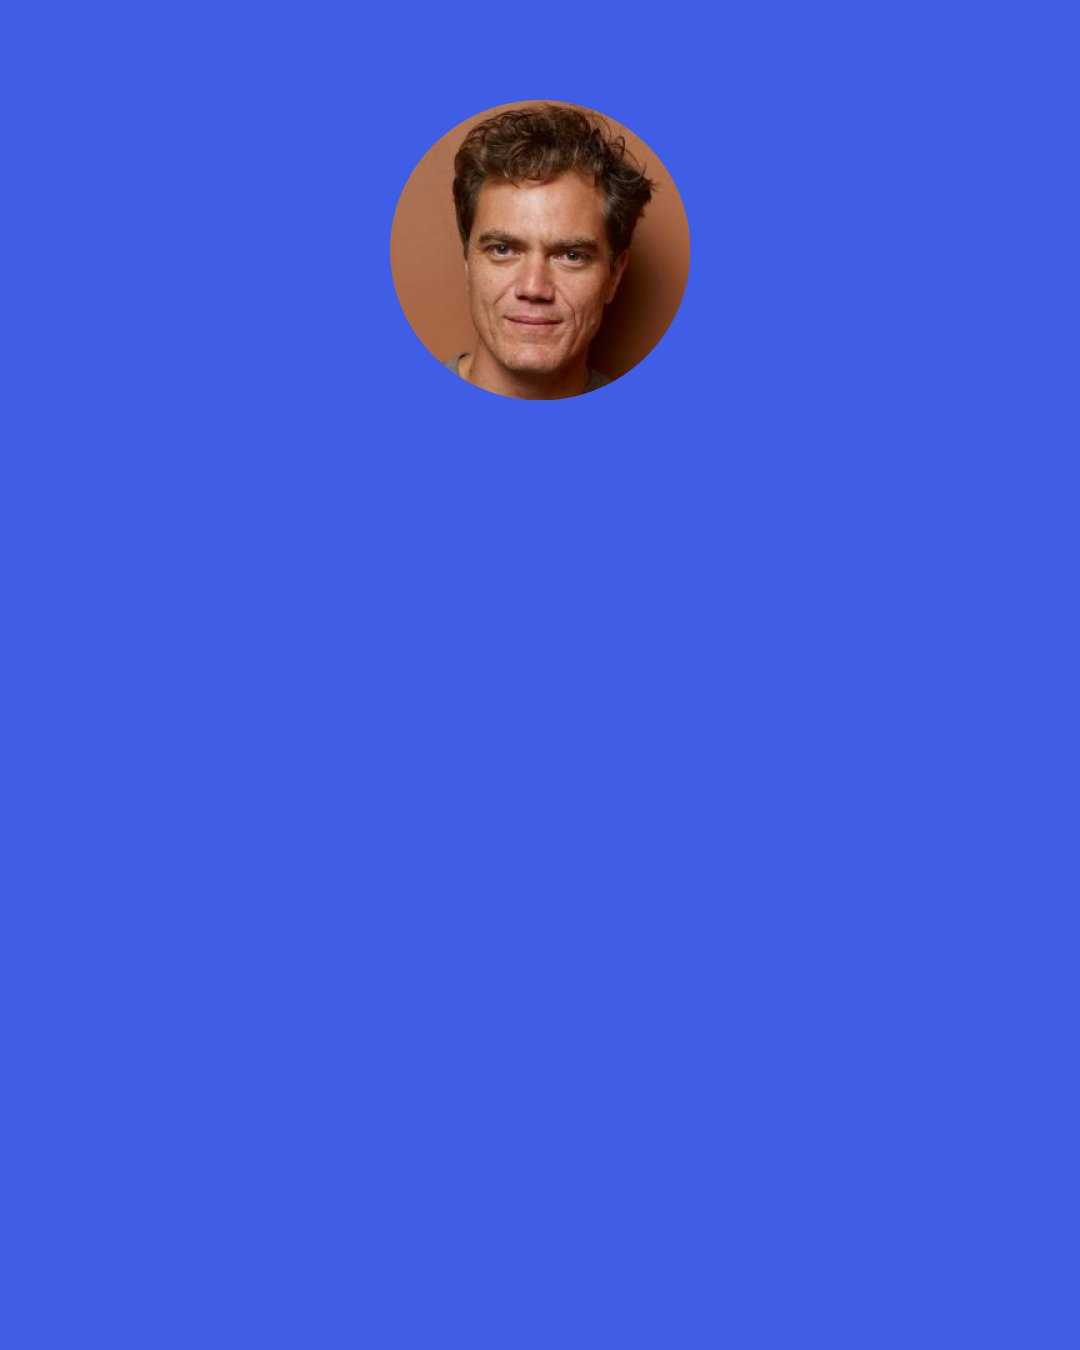 Michael Shannon: People are morons. I don't do any social media stuff. I have people telling me all the time, "You should do Twitter, you should do this, you should get on Facebook." Are you insane? I'm not doing any of that crap. I stay the hell off that thing. Every once in a while, I send a business email, and that's it.